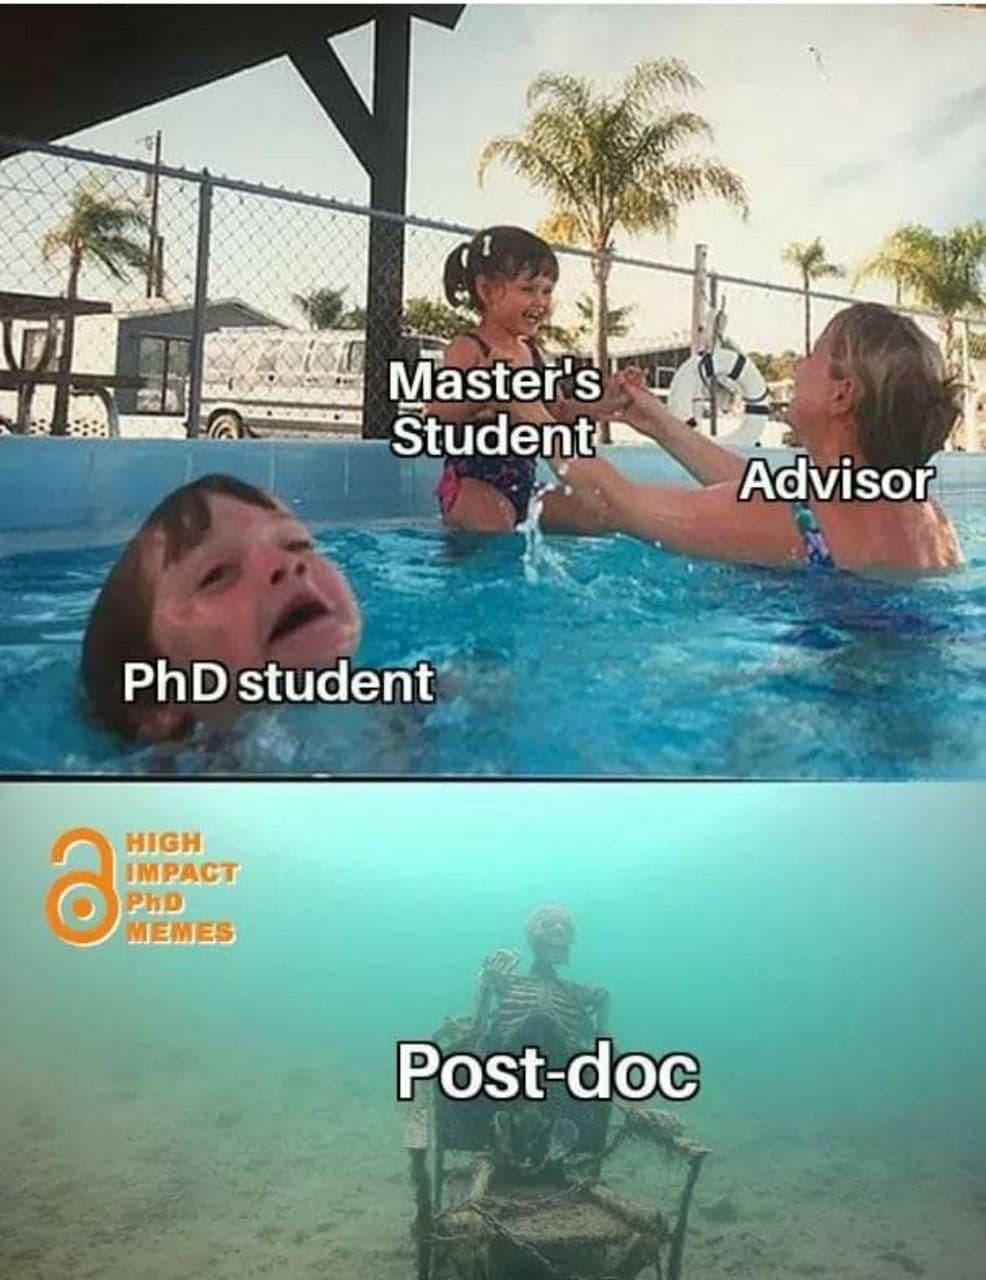 a master’s student get help learning to swim by the advisor. A PhD student is trying to swim alone and drown. A skeleton under water labeled “post doc”.